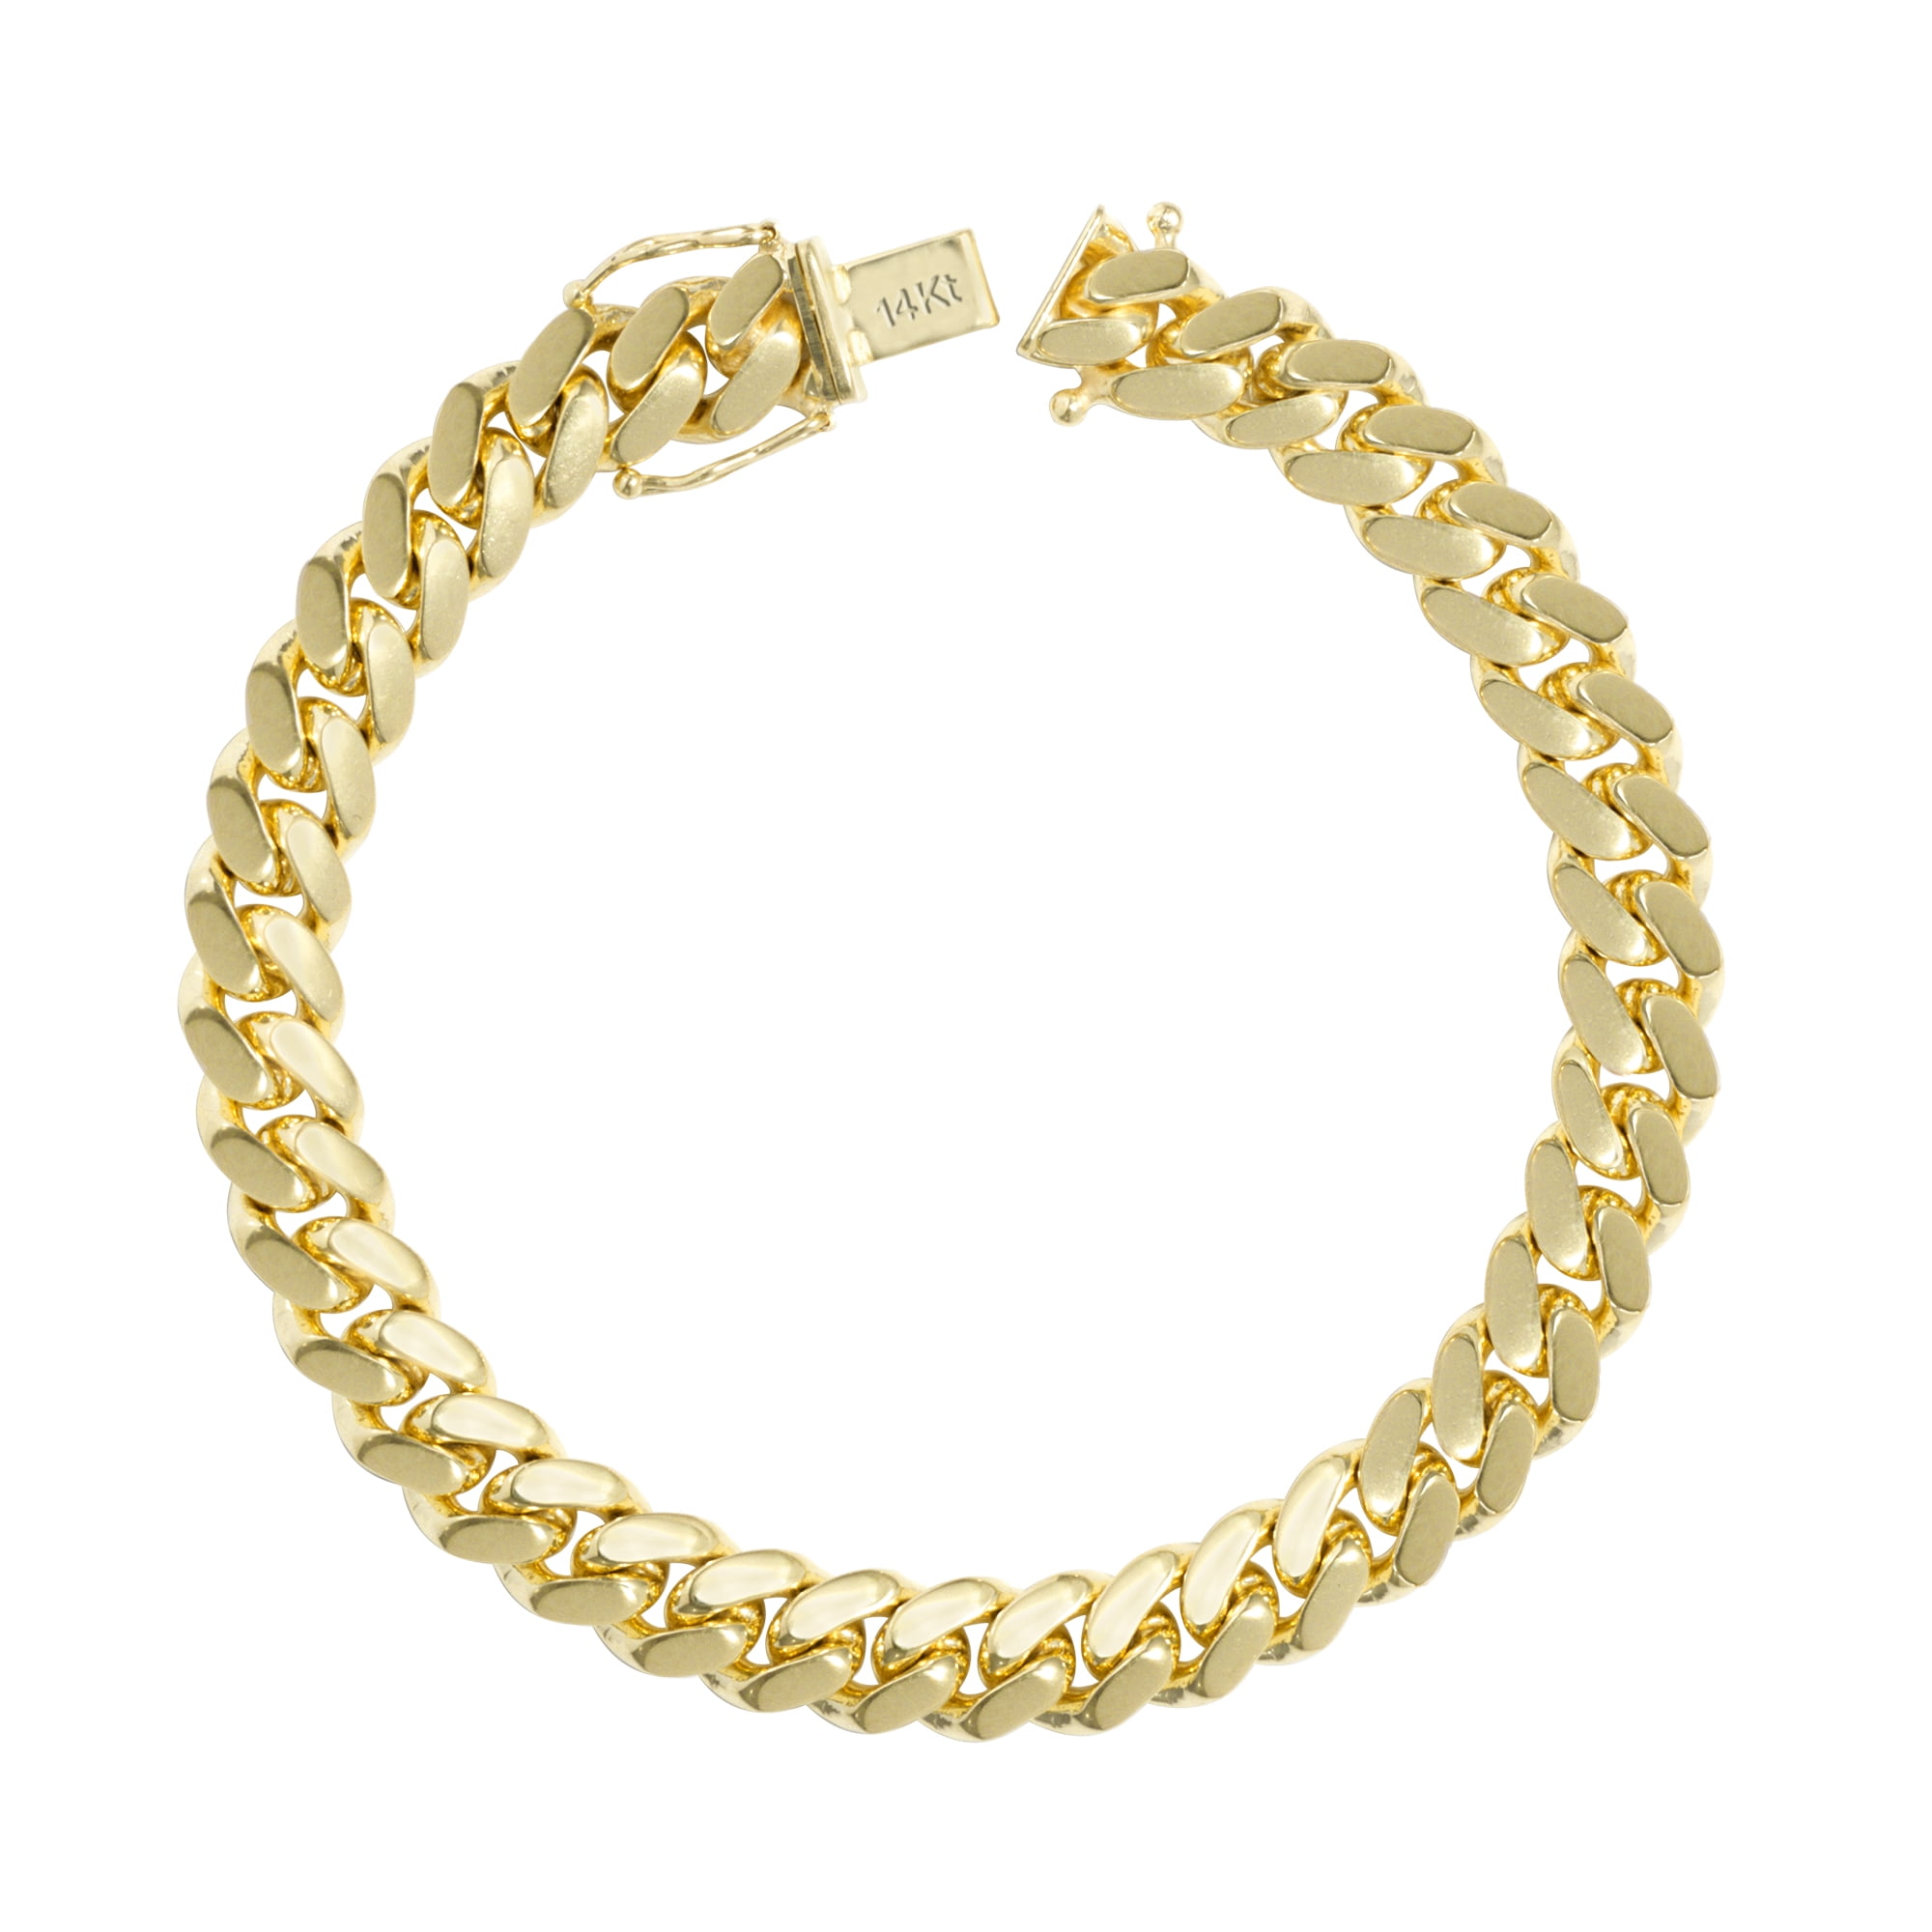 Nuragold - 14K Yellow Gold Mens Solid 8mm Miami Cuban Link Chain Bracelet Box Clasp, 7.5"- 9 ...